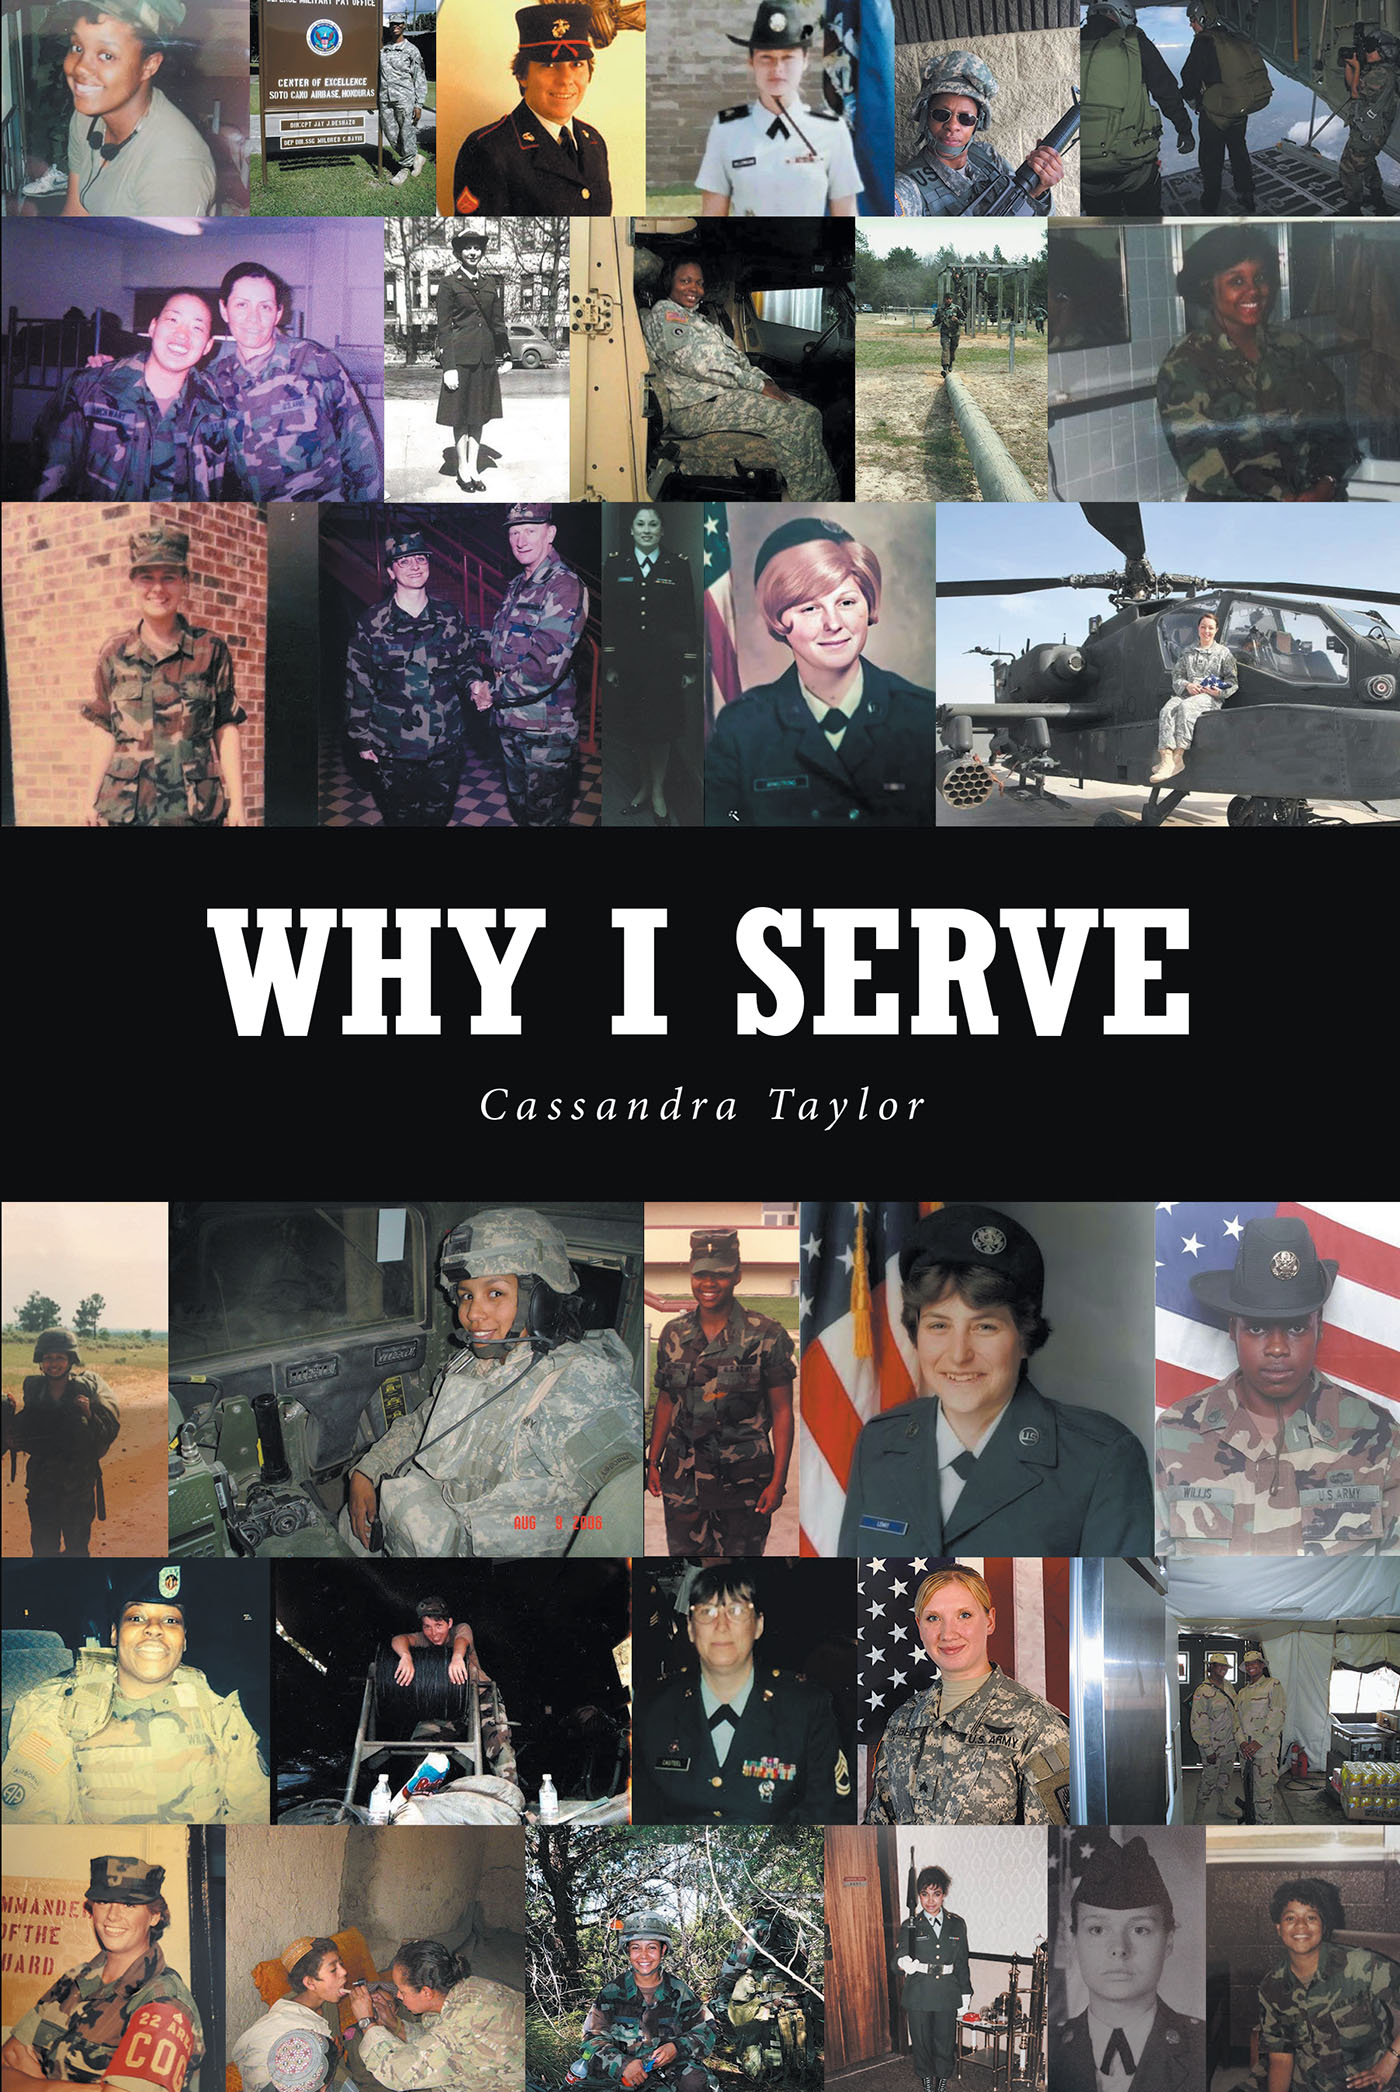 Author Cassandra Taylor’s New Book, "Why I Serve," Highlights the Powerful and Impactful Stories of Women Veterans of the United States Military